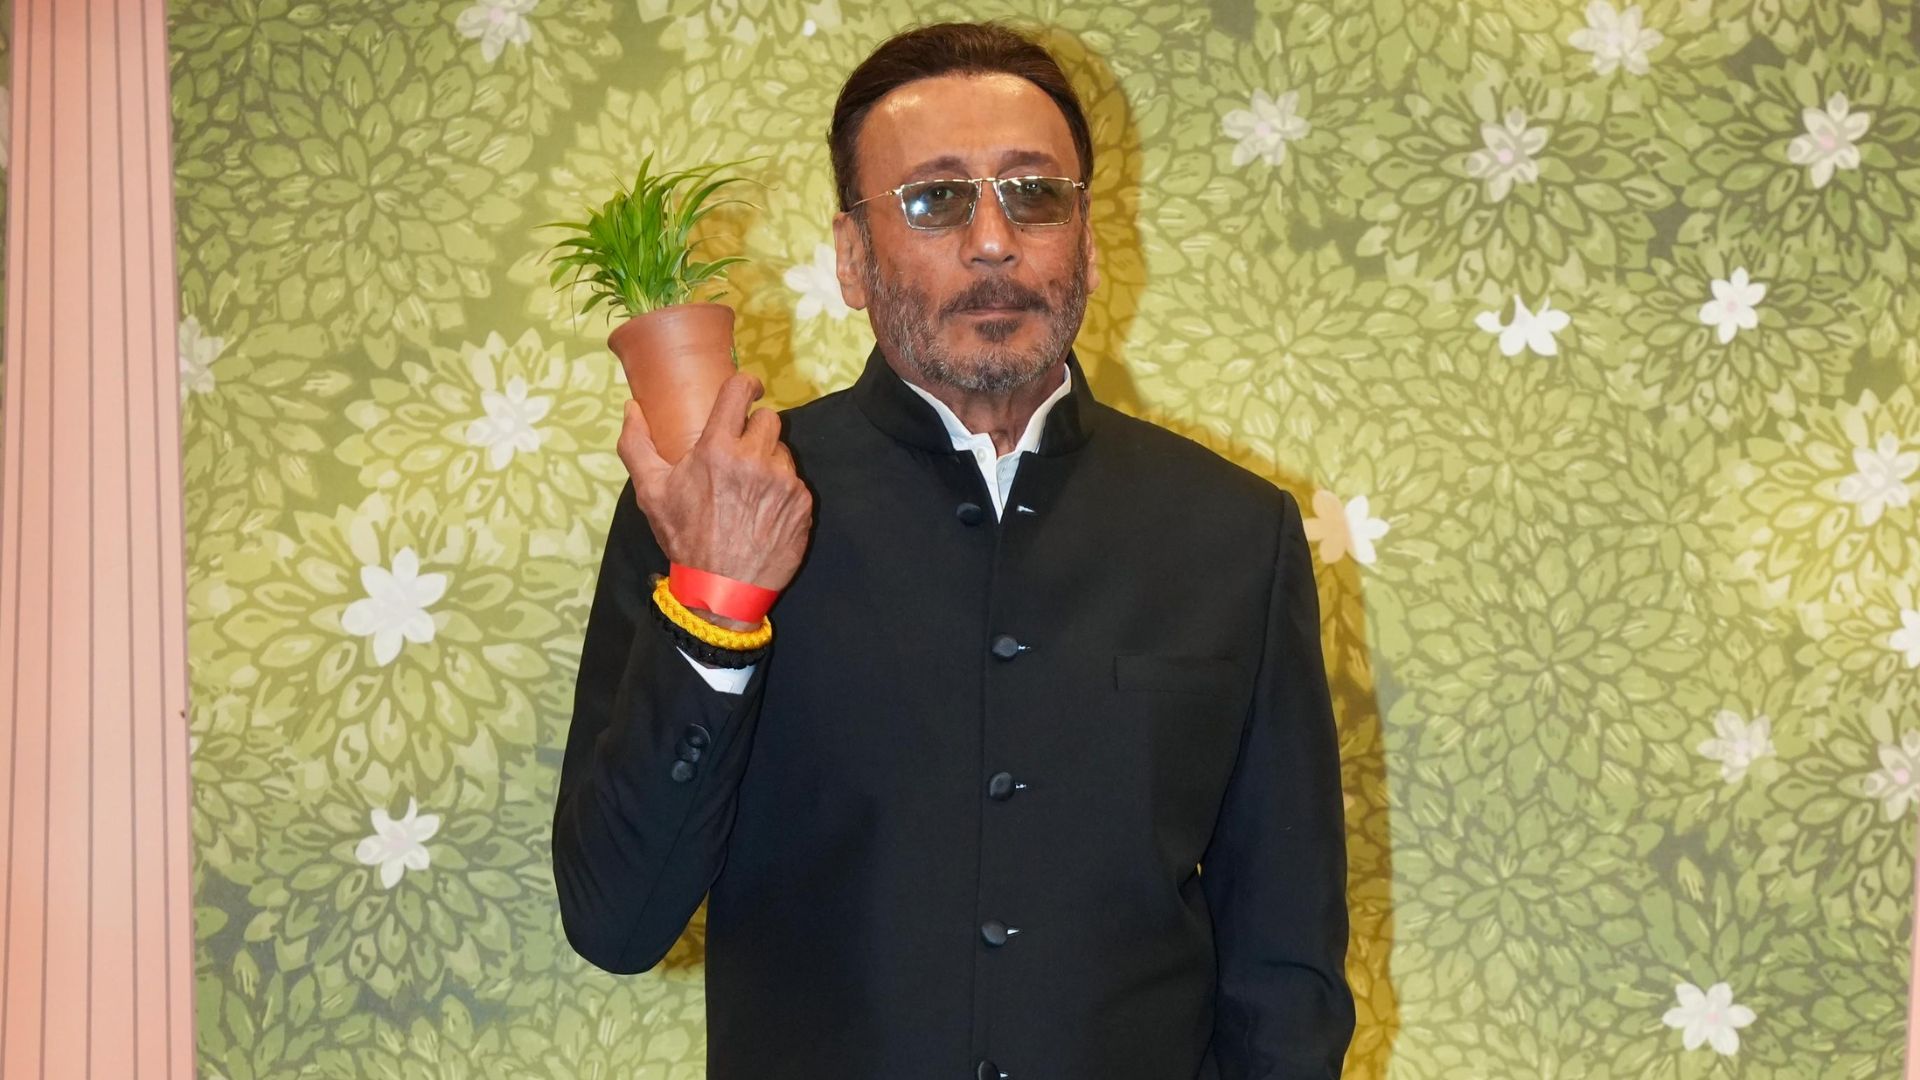 Jackie Shroff Attends Anant-Radhika’s ‘Shubh Aashirwad’ Ceremony With Signature Plant–Watch Video